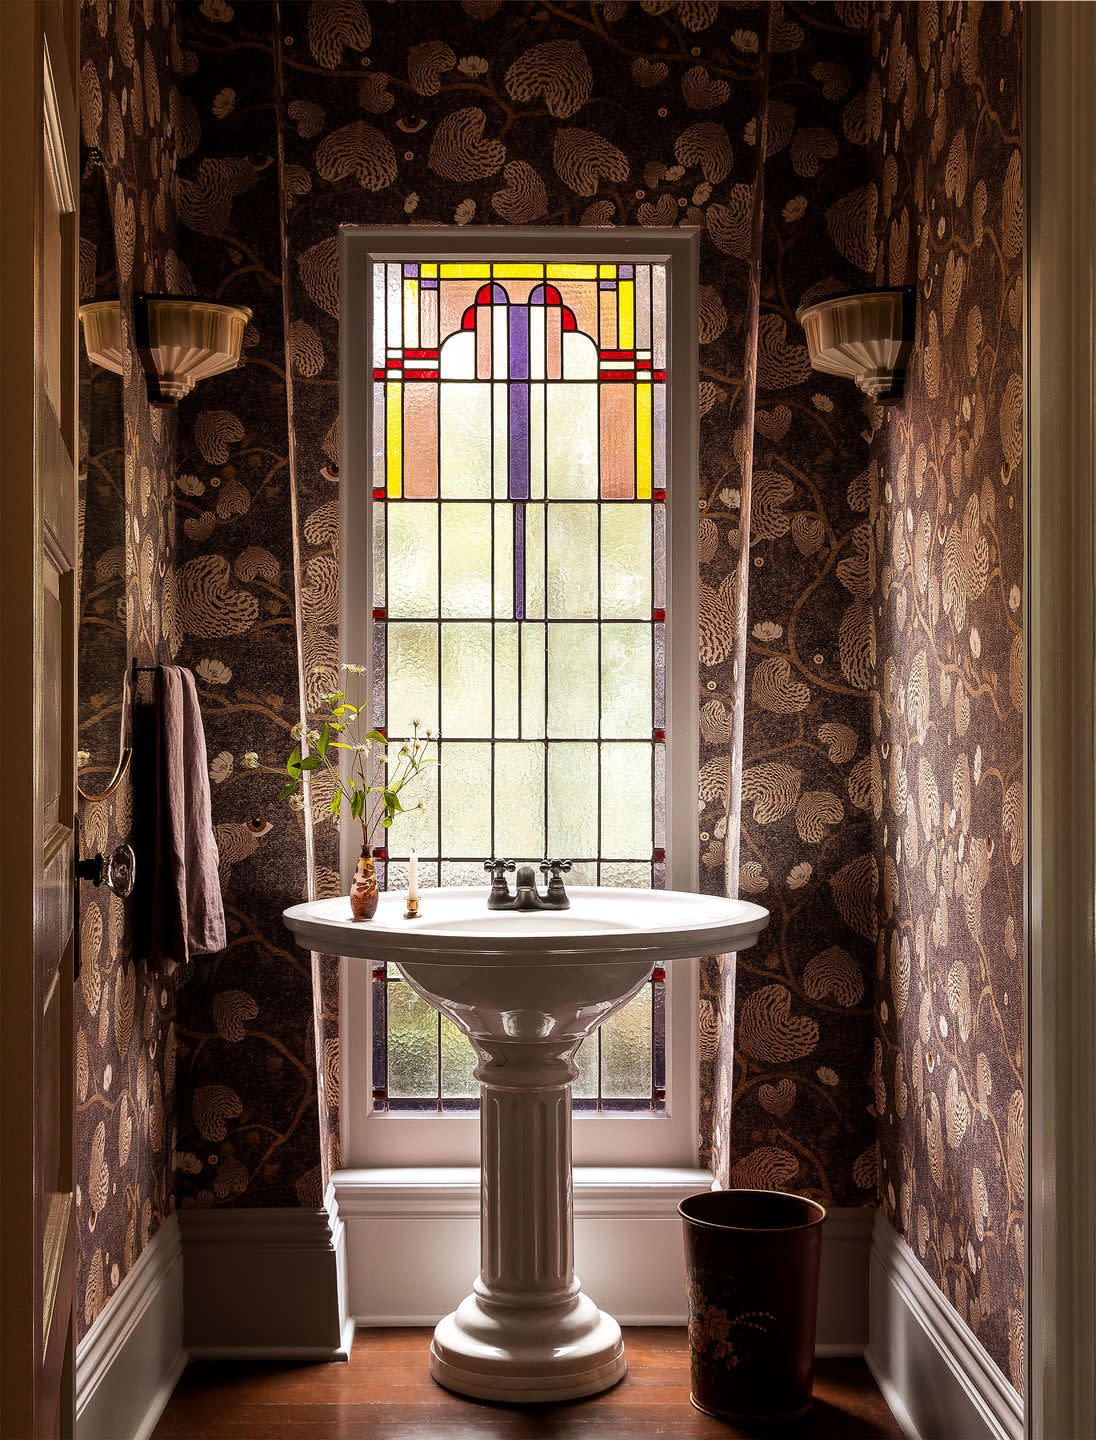 powder room with a brown background leaf pattern wallpaper, vintage sconces, a pedestal sink in front of a tall window with stained glass